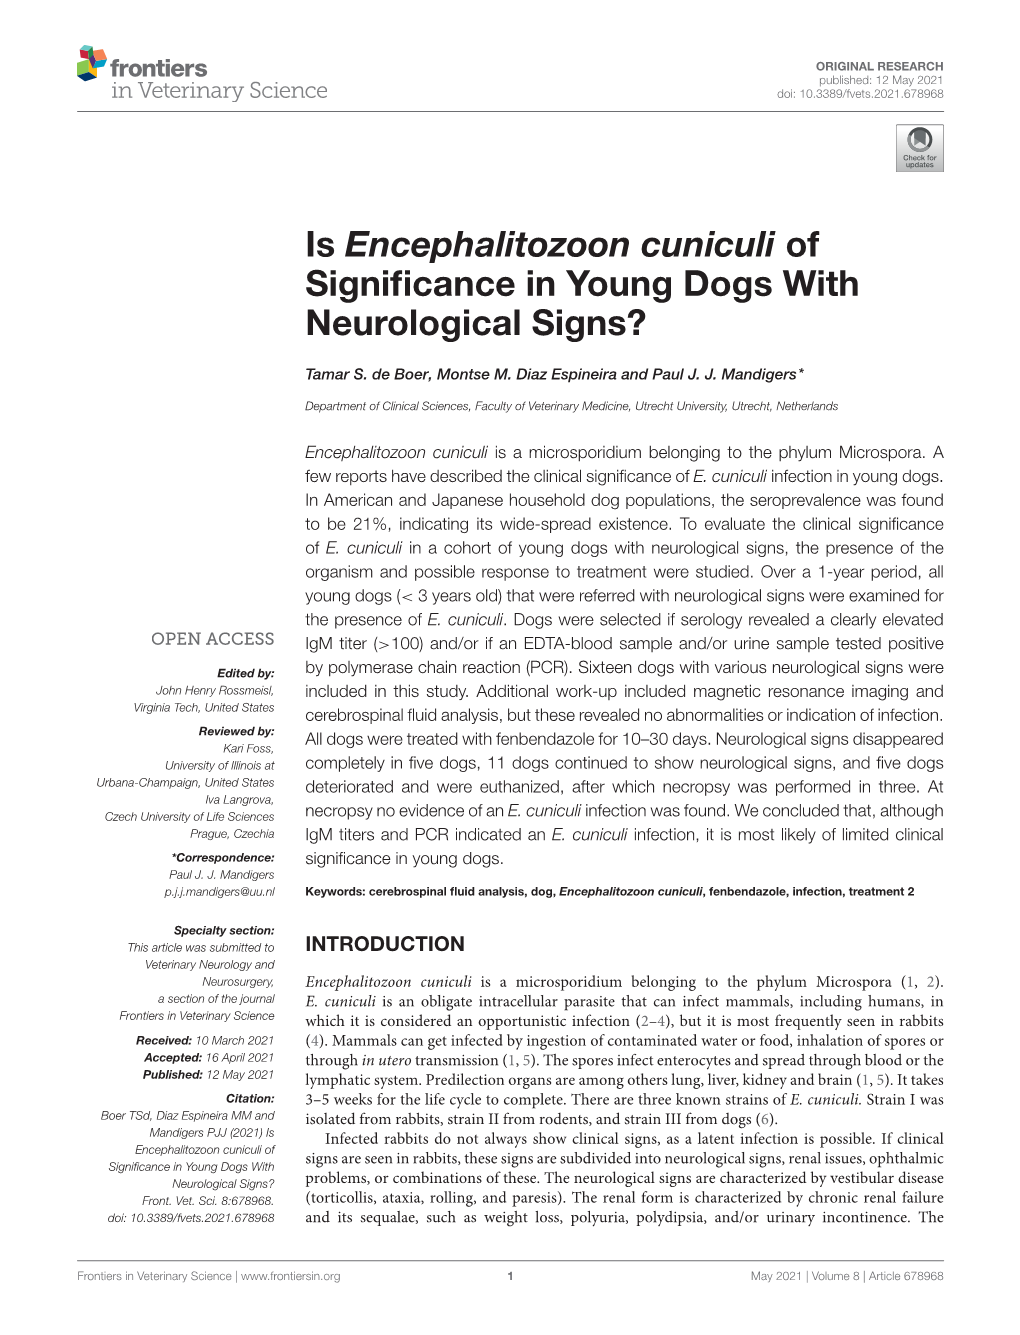 Is Encephalitozoon Cuniculi of Significance in Young Dogs With